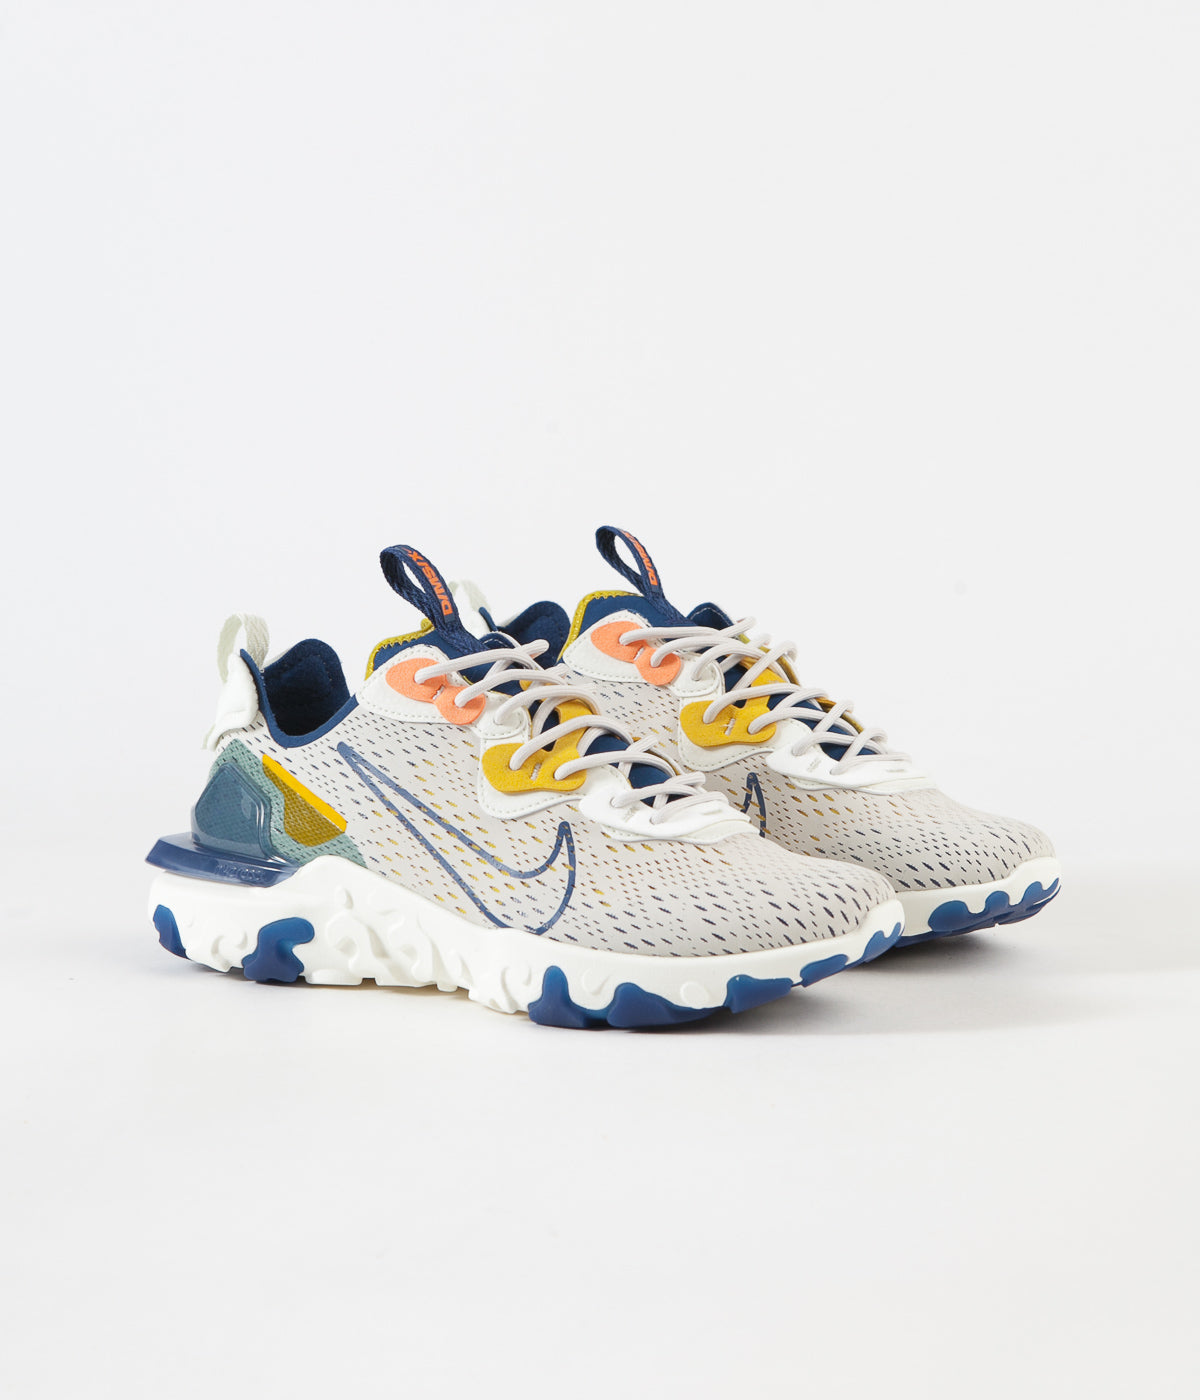 nike react vision trainers in light orewood brown